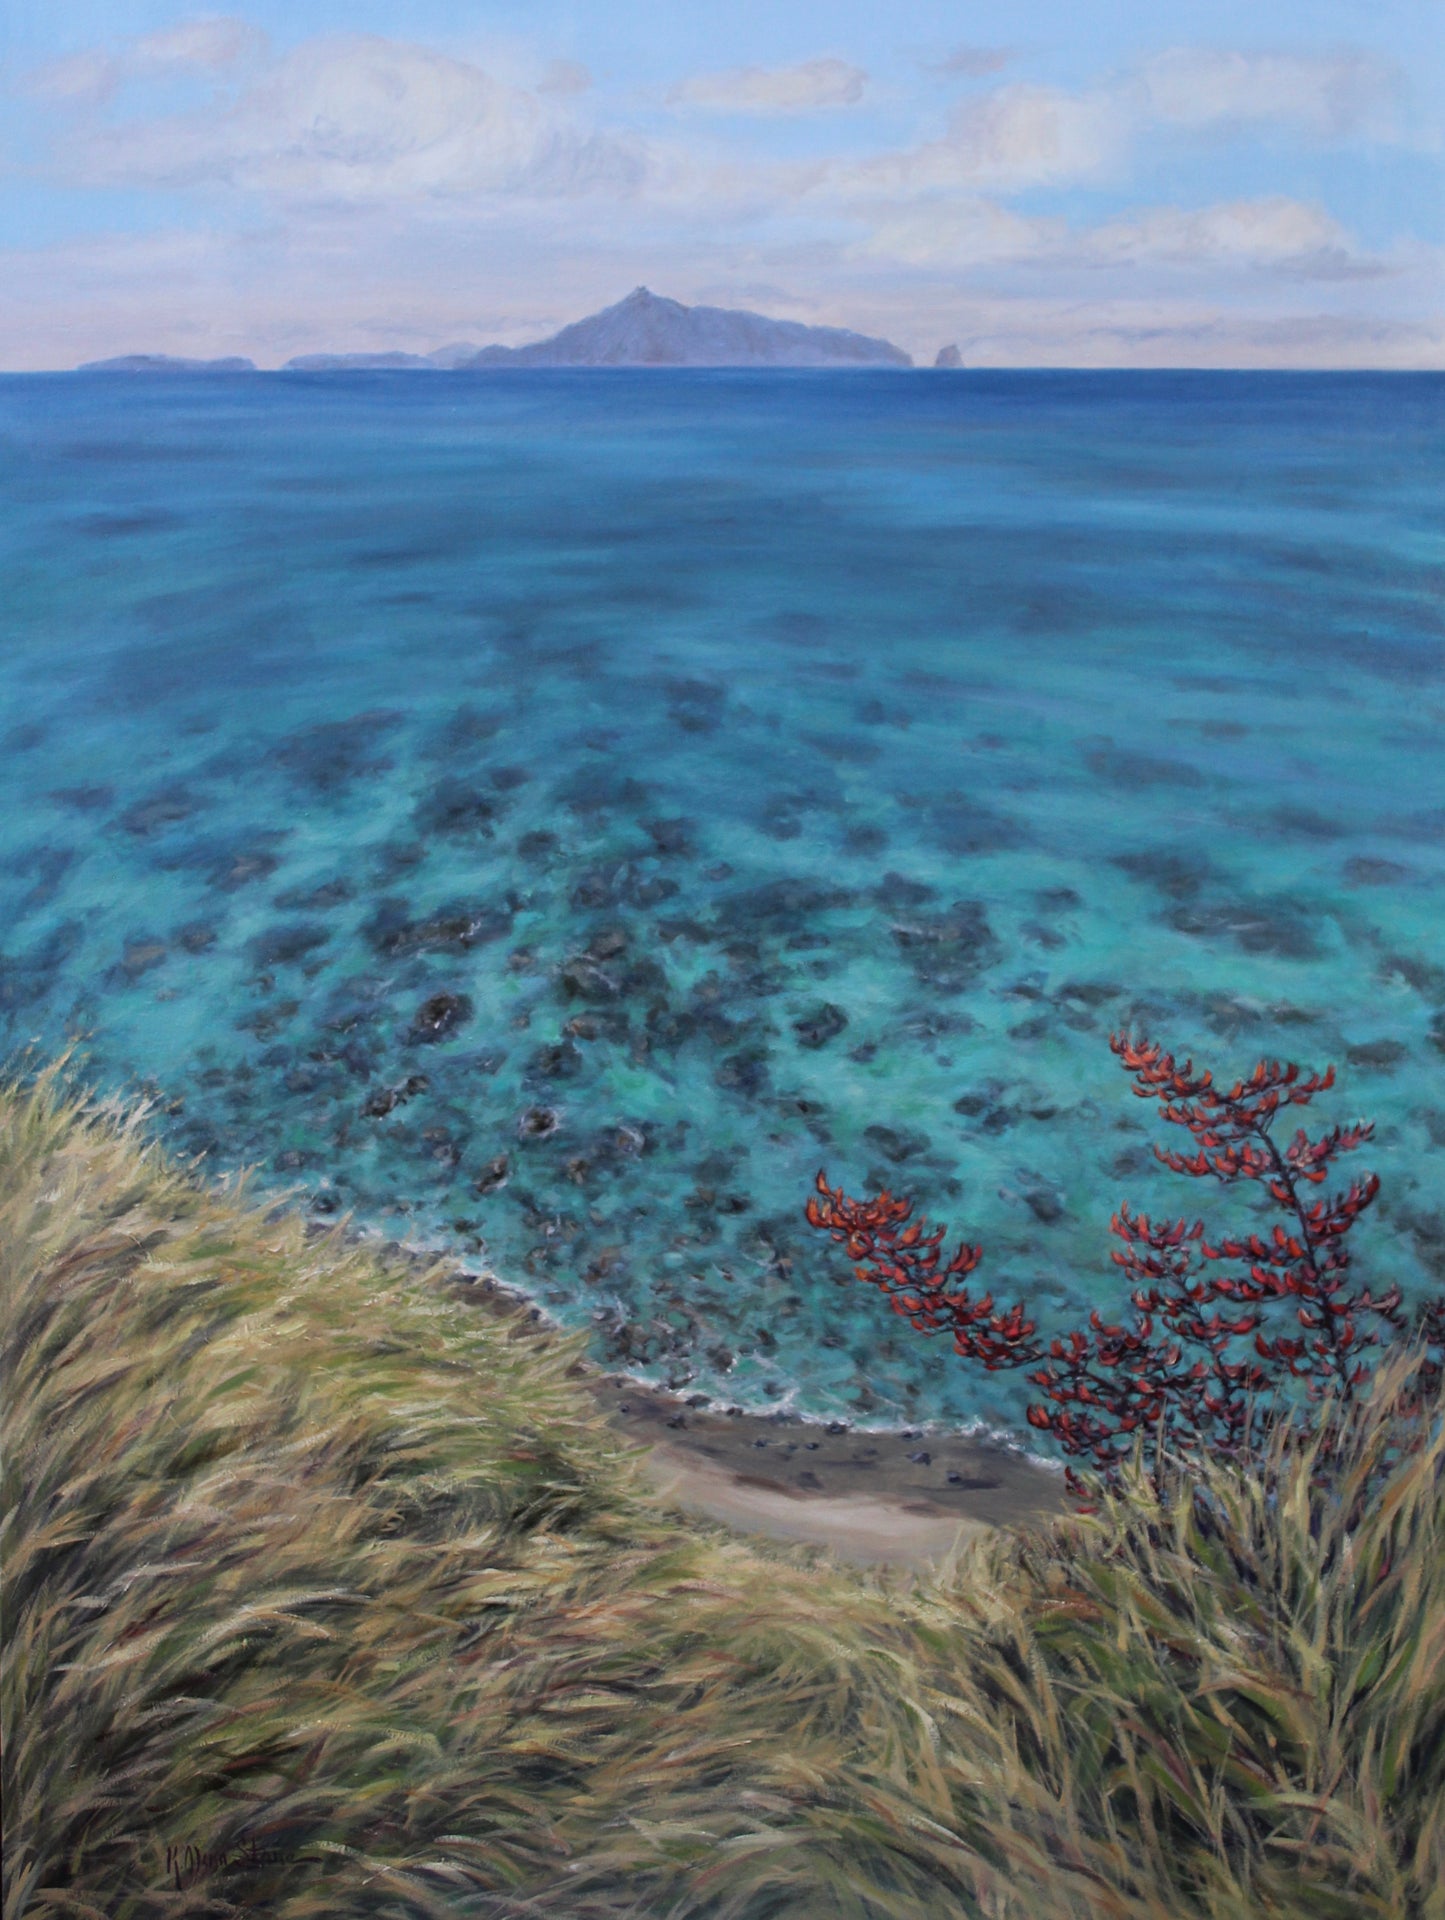 View From The Cliff At Mangawhai, 48" x 33" Original New Zealand Seascape Oil Painting On Canvas